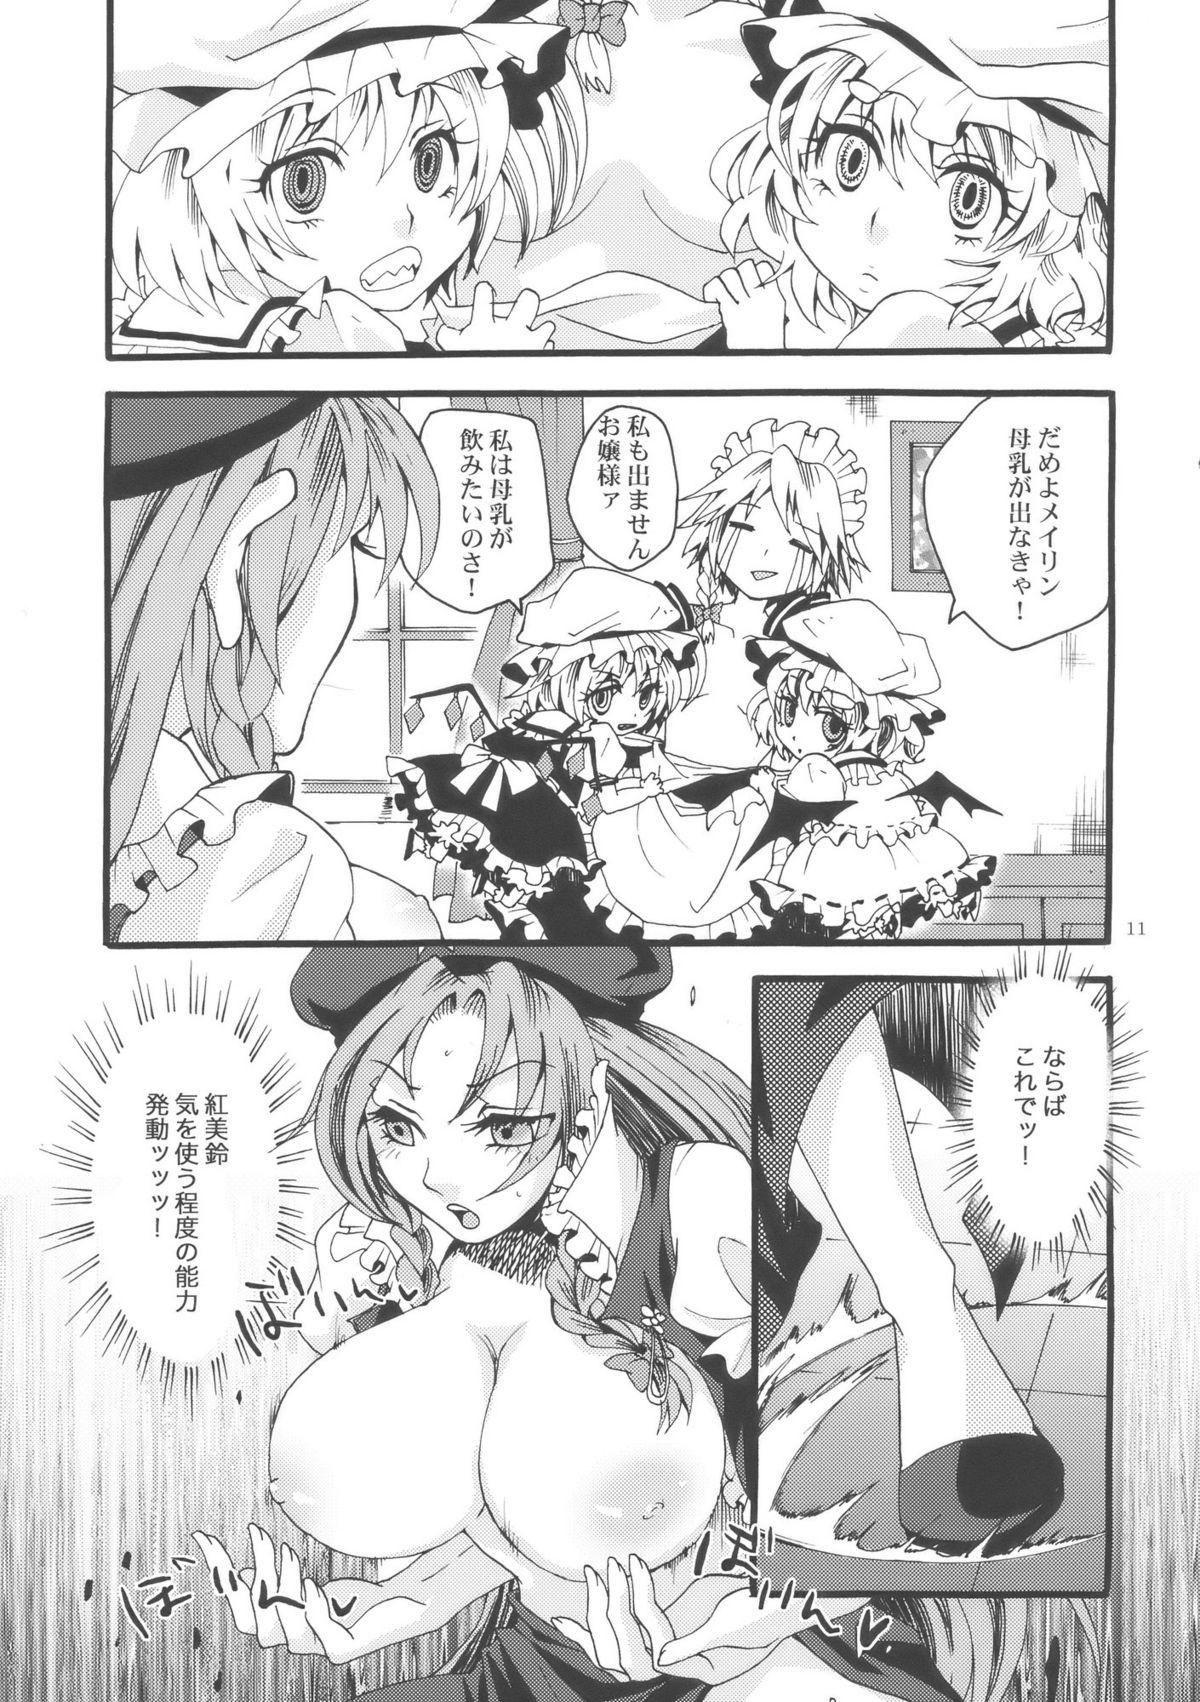 Puto Bloody White - Touhou project Stripping - Page 11